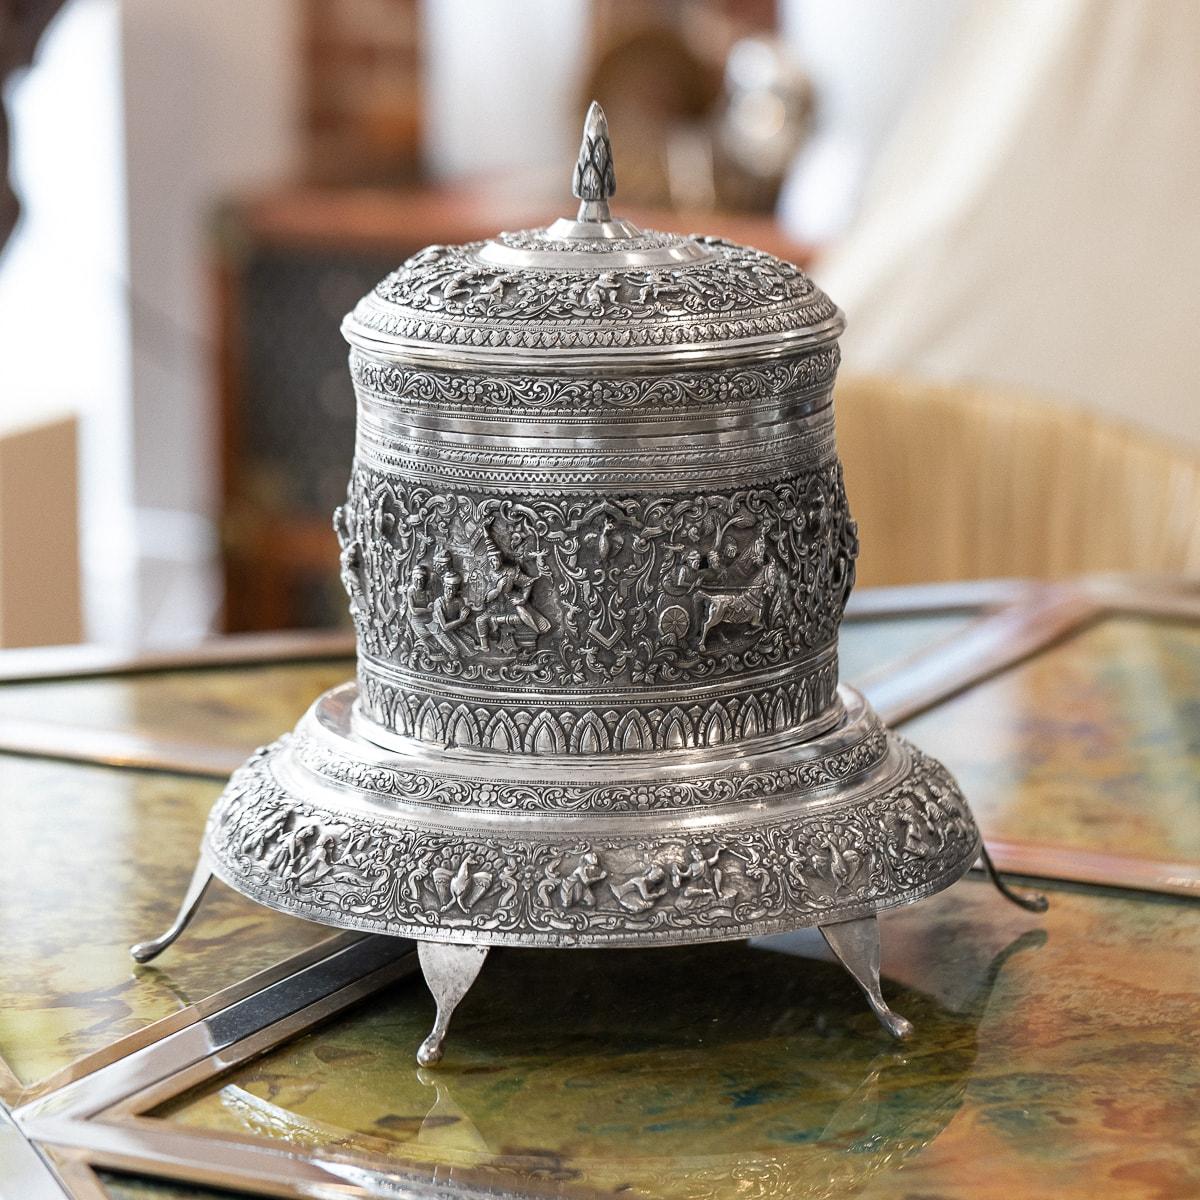 19th Century Burmese (Myanmar) solid silver betel box on stand, of traditional shape, highly-decorative, each part is chased in very high-relief with various scenes from Burmese folklore and Buddhism in shaped reserves, surrounded by scrolling